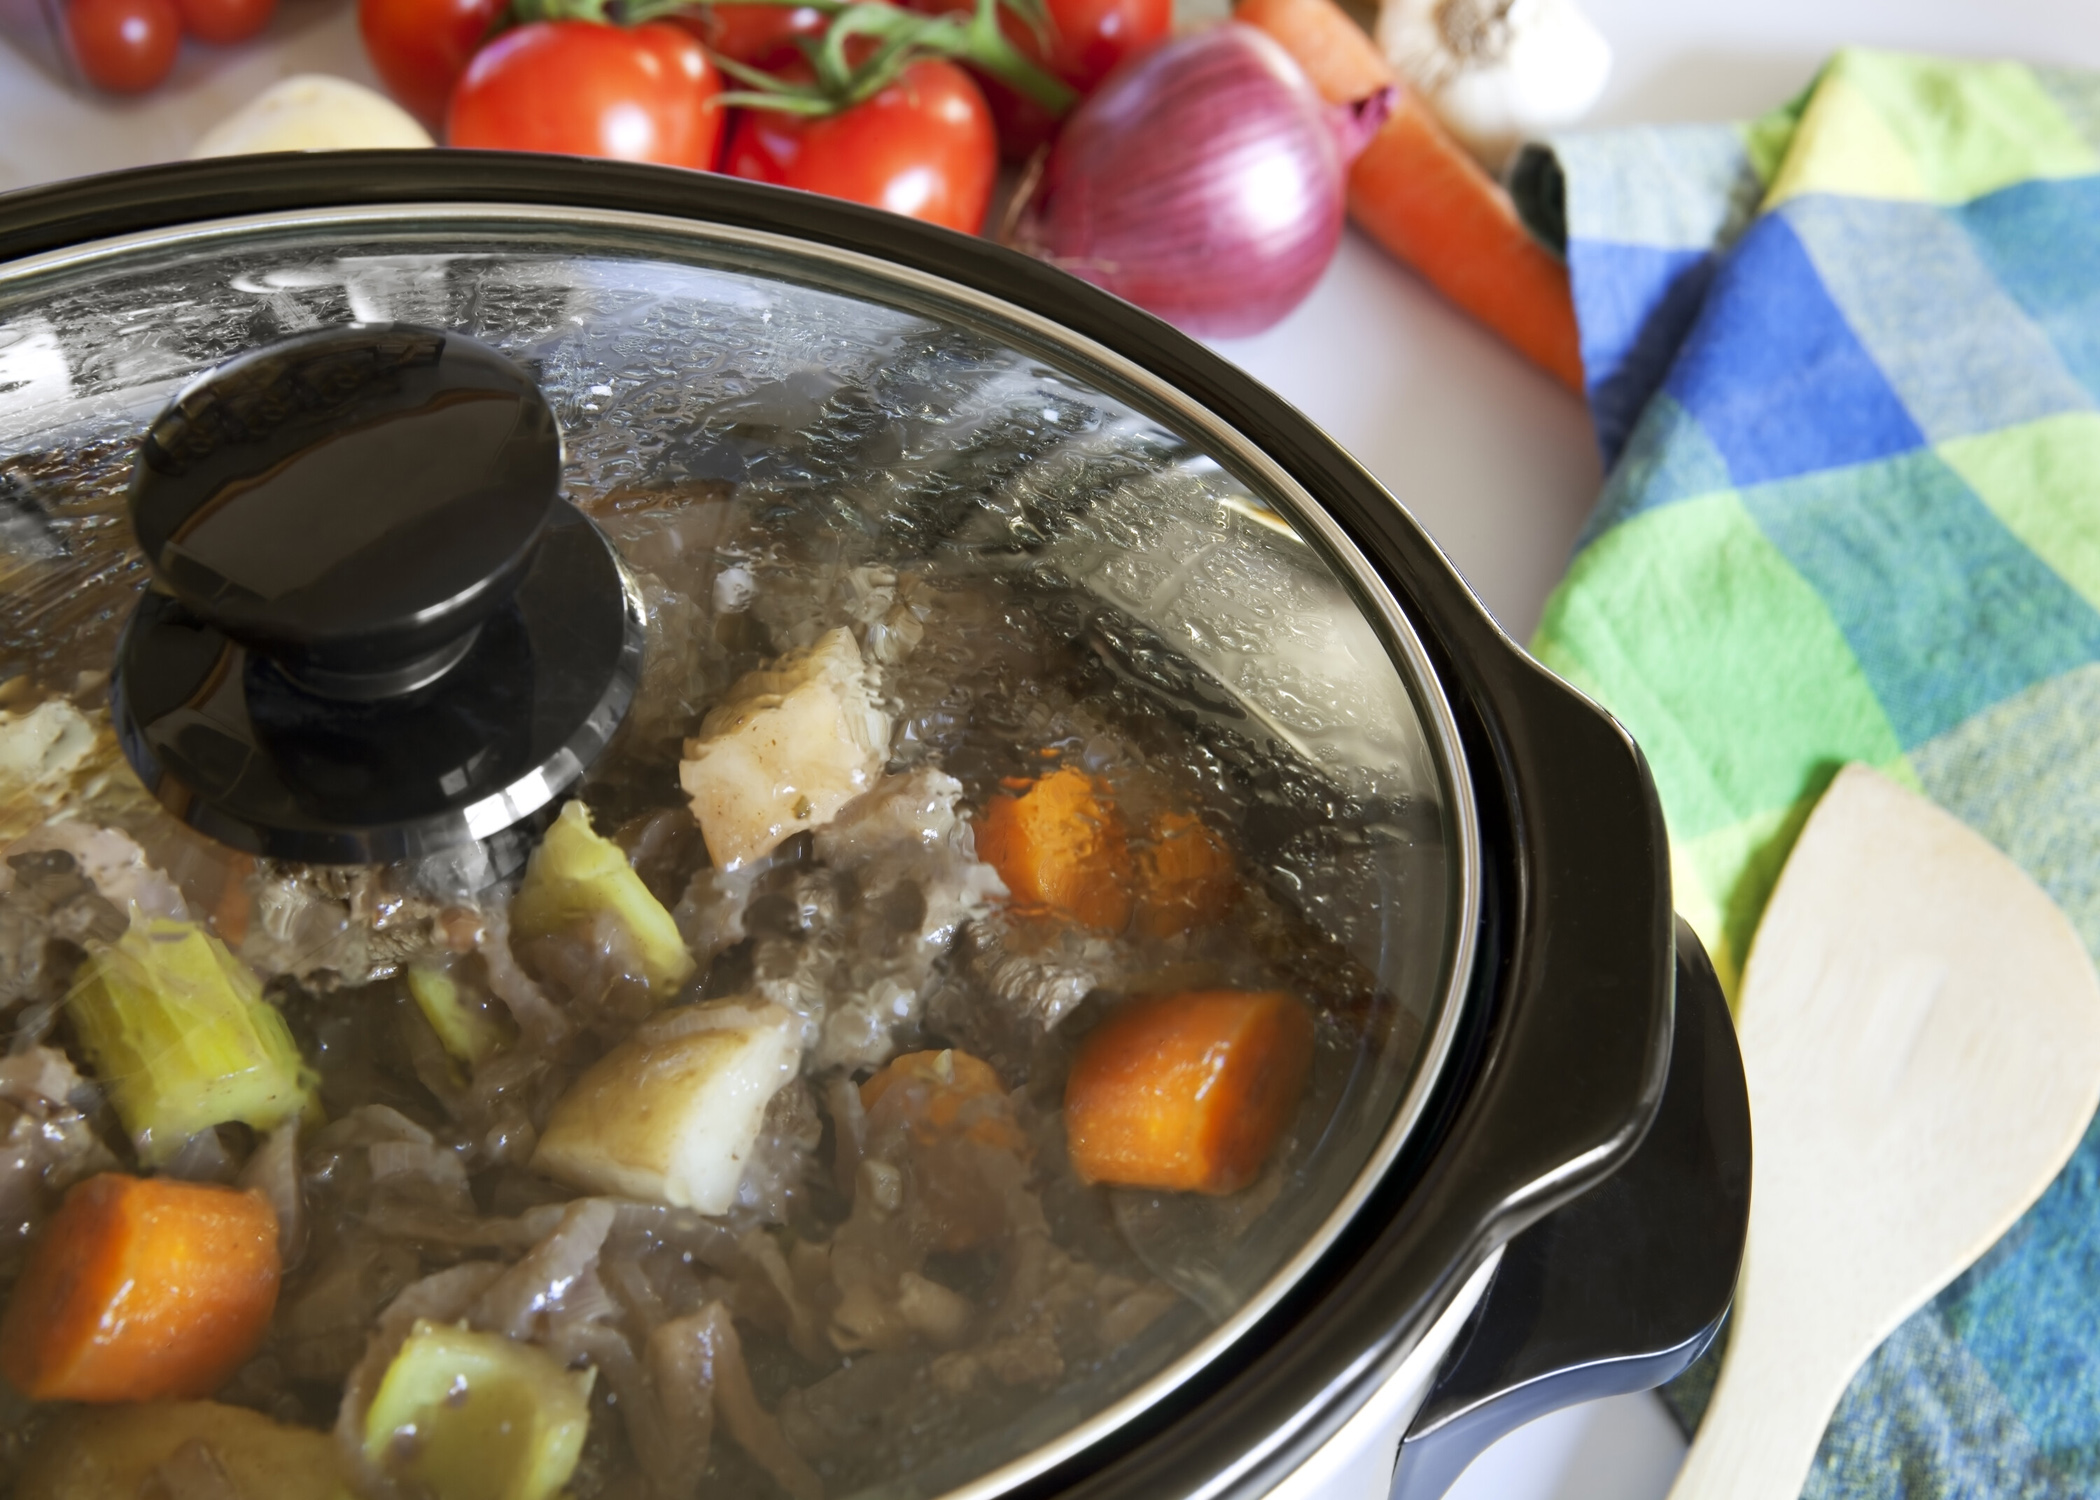 10 Food Safety Tips for the Slow Cooker